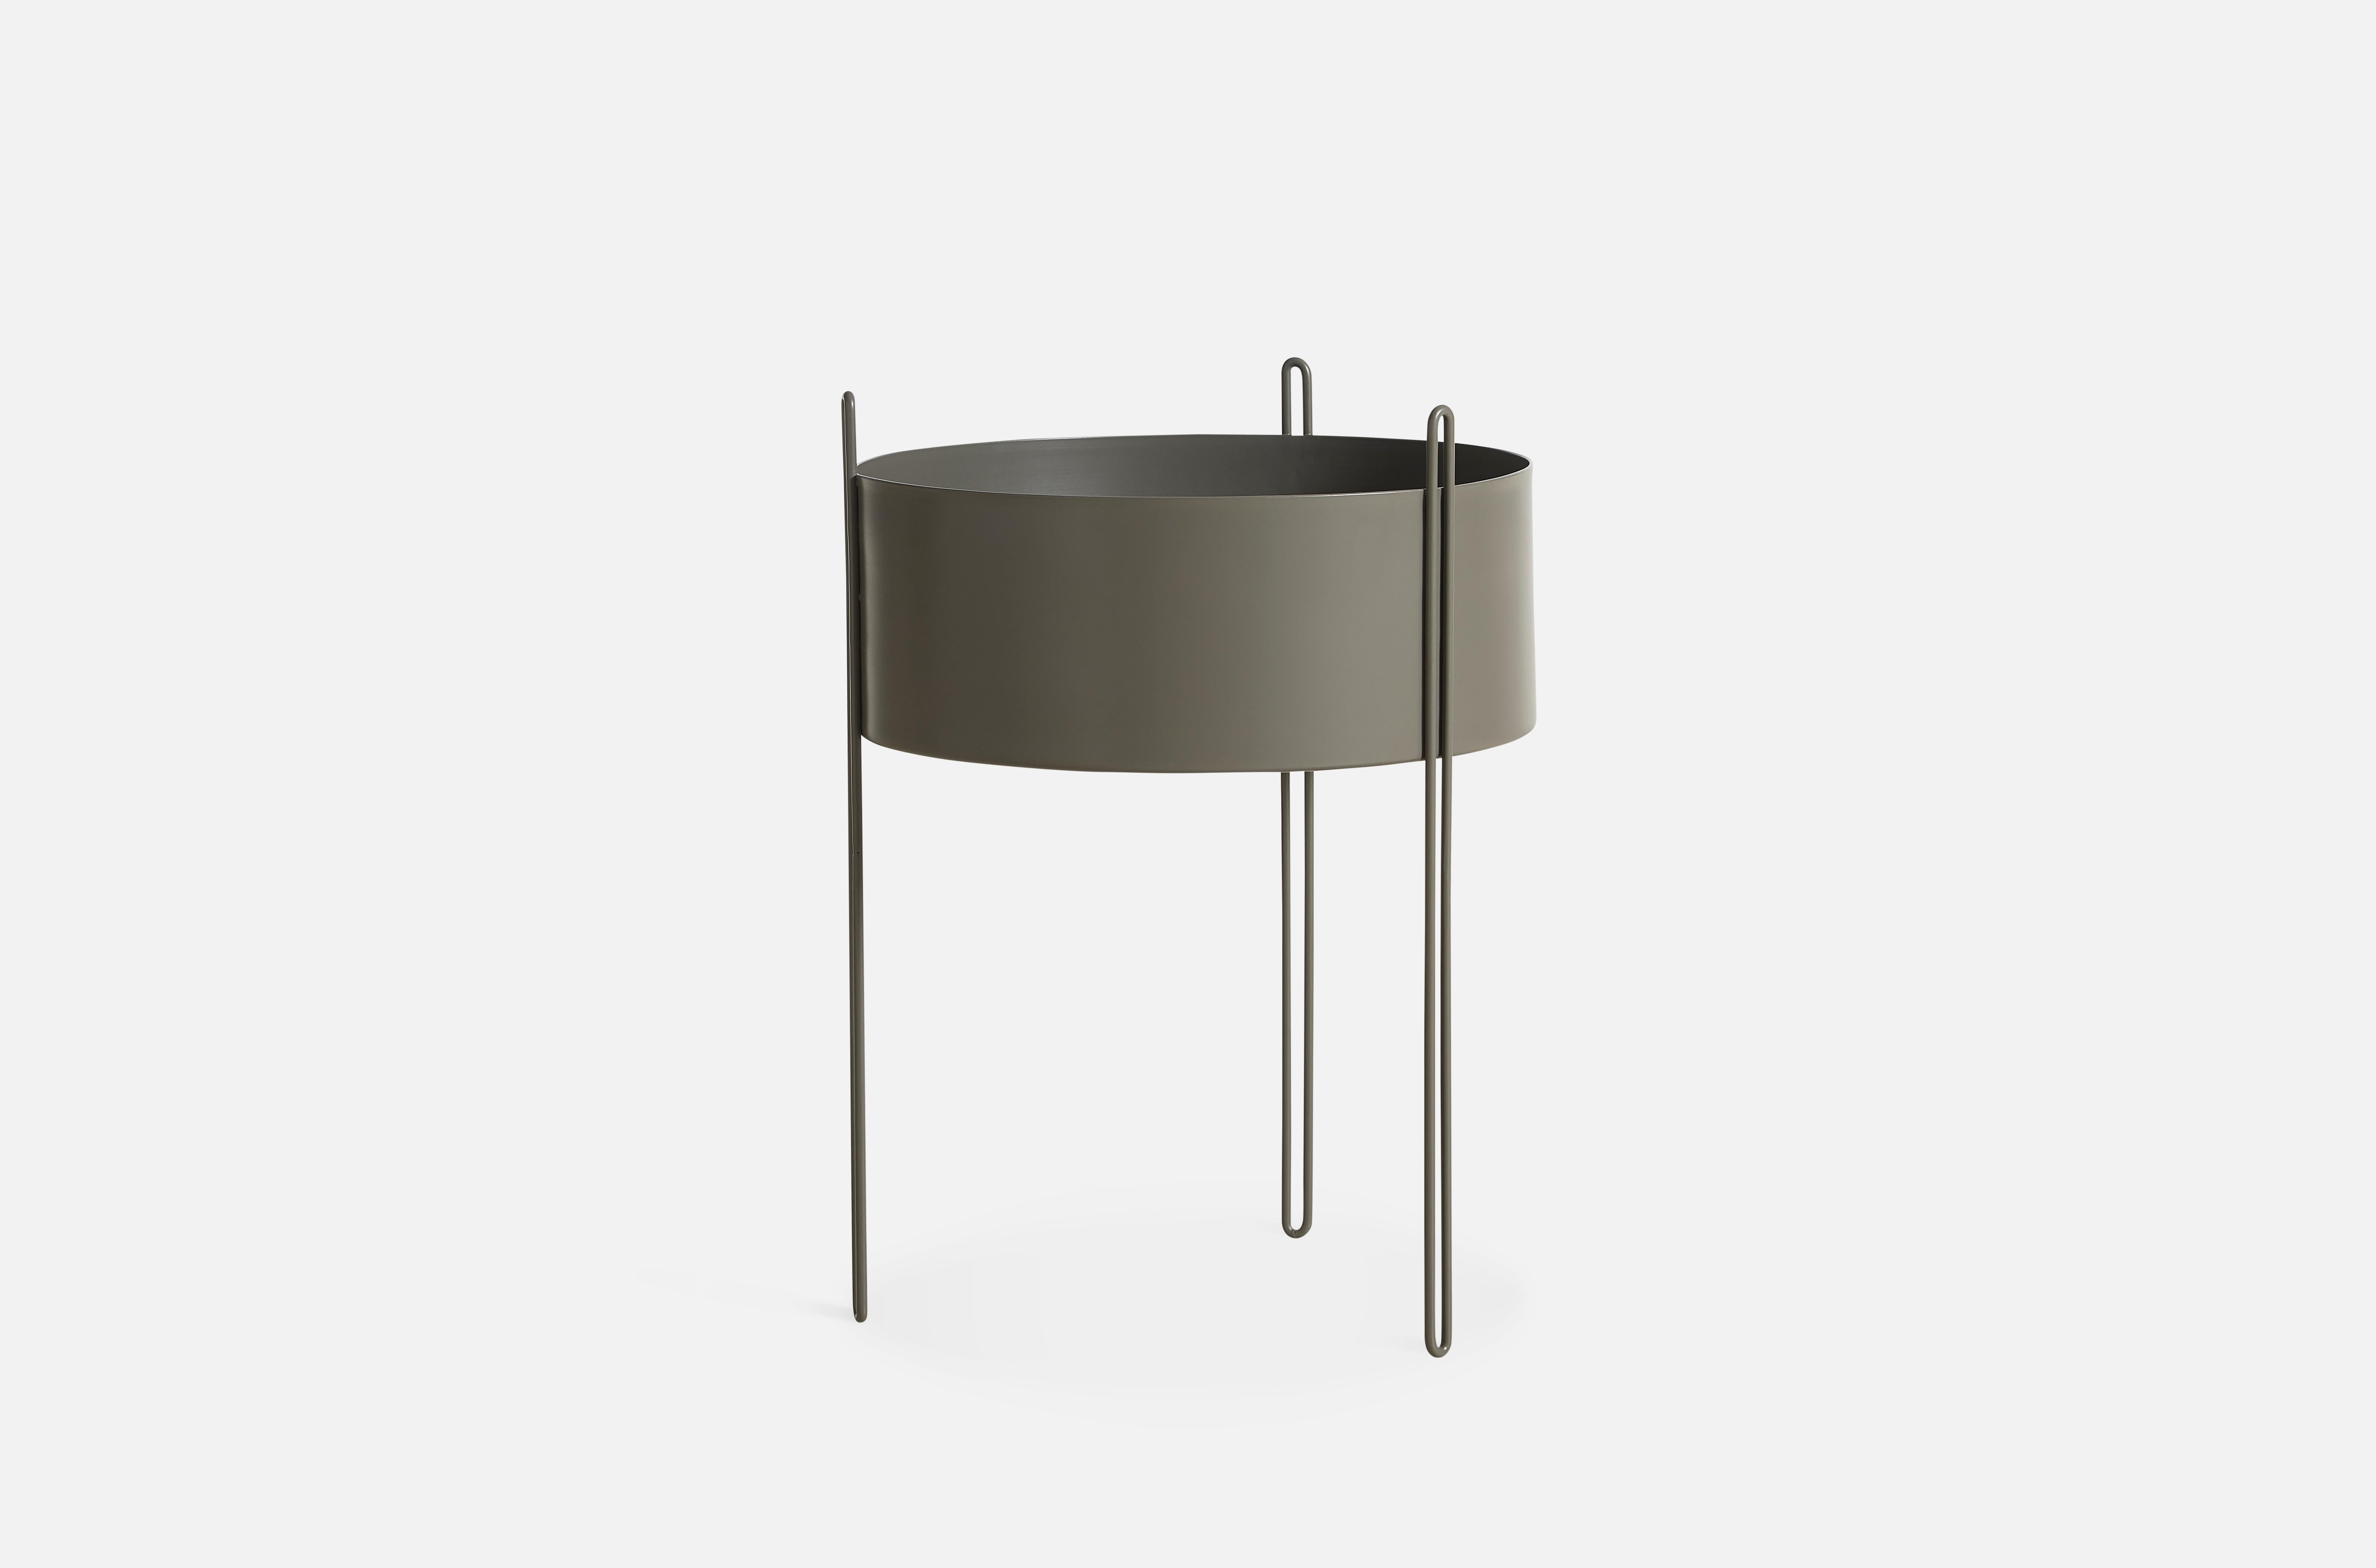 Large Taupe Pidestall planter by Emilie Stahl Carlsen
Materials: Metal.
Dimensions: D 40 x H 55 cm
Available in grey, red, taupe or black and in 3 sizes: D 15 x H 15, D 40 x H 35, D 40 x H 55 cm.

Emilie Stahl Carlsen is a Nor wegian designer